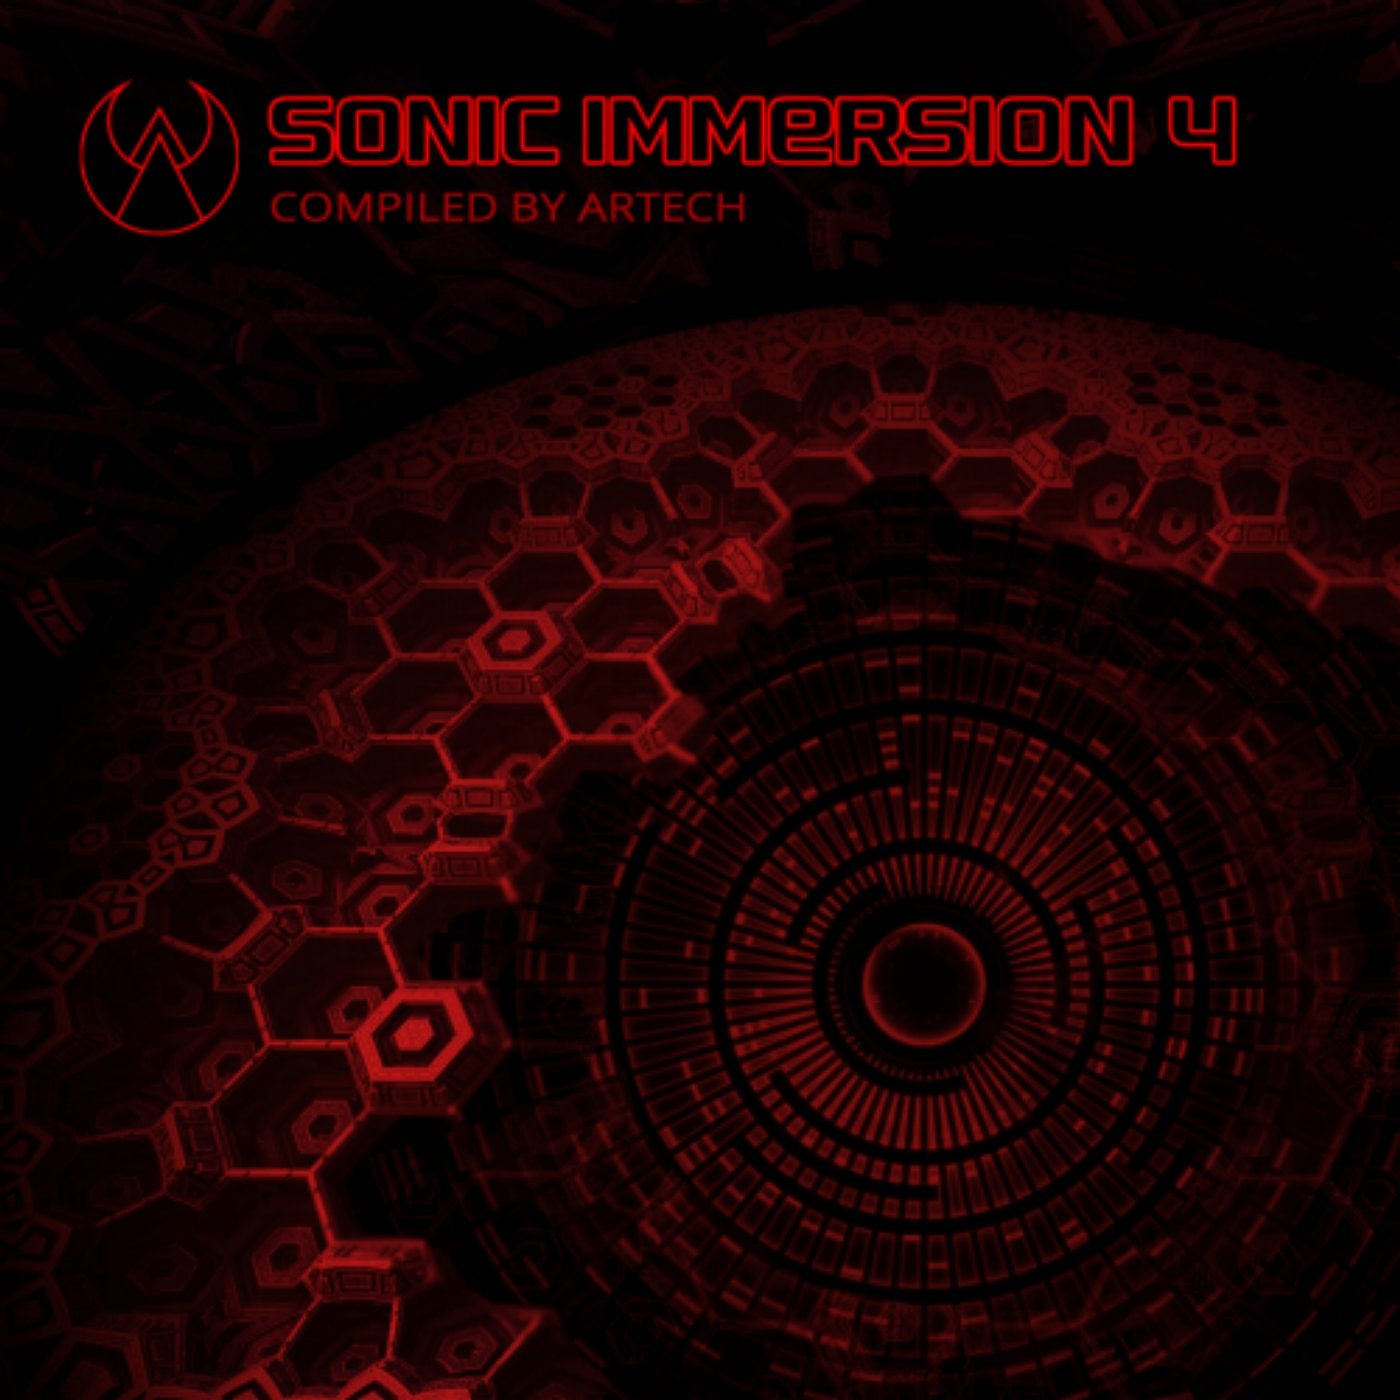 Sonic Immersion 4 (Compiled by Artech)